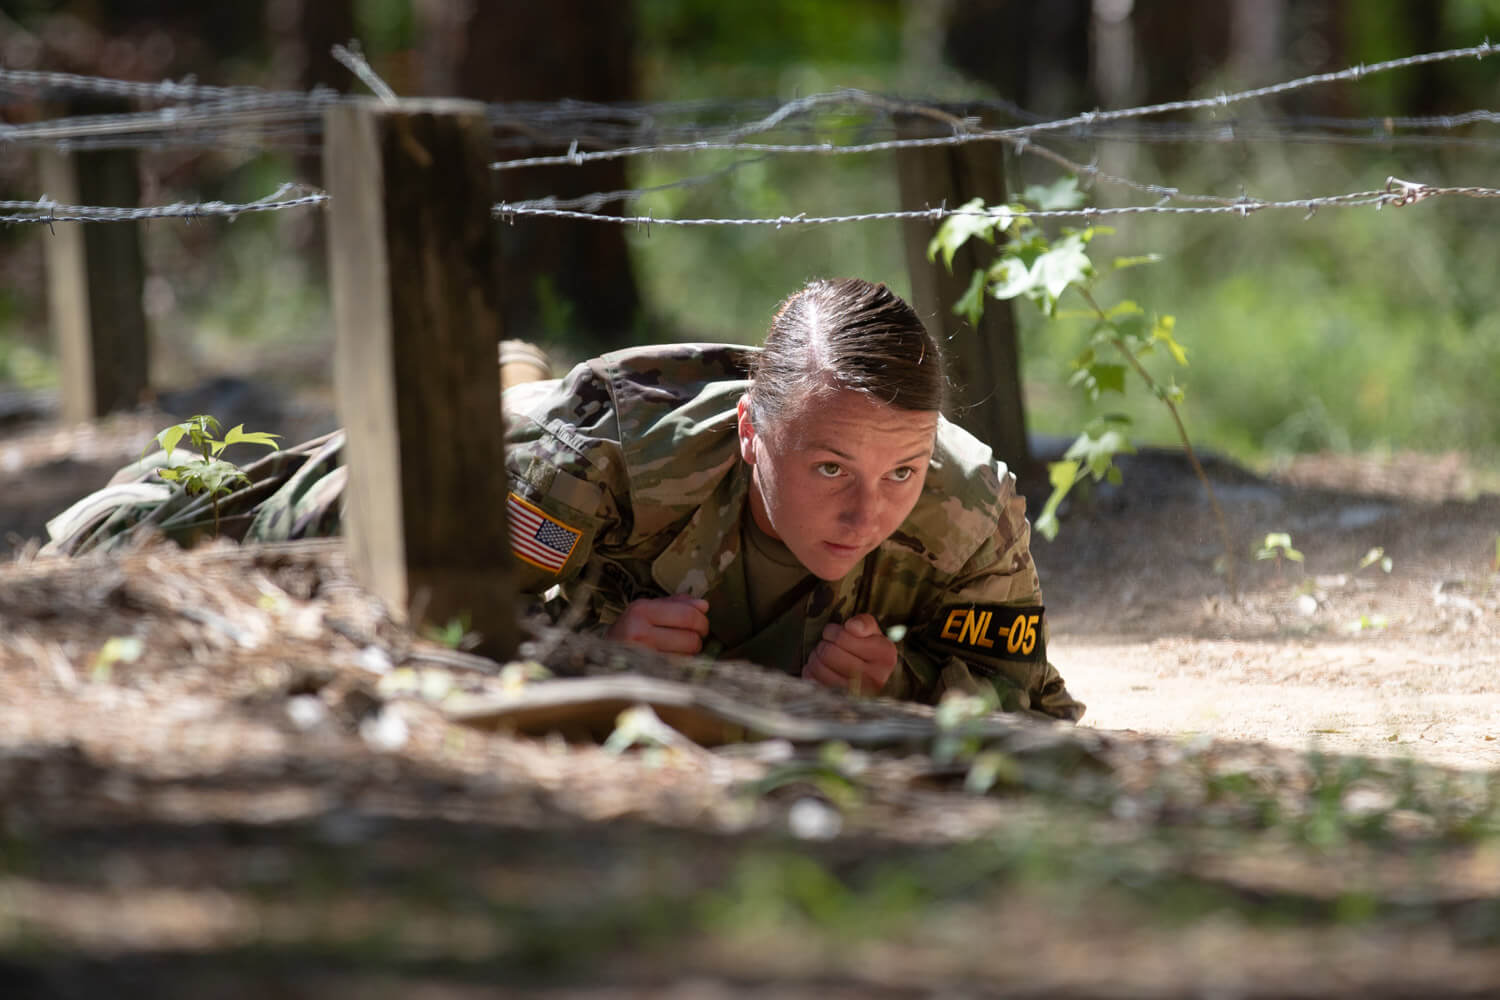 SPC Marina Grage, HHC, 890th Engineer Battalion, Mississippi National Guard, takes part in an obstacle course competition at Camp Butner, N.C., during Region III Best Warrior Competition on May 15, 2019. The five-day competition consists of tests of physical and mental endurance that include physical fitness, army warrior tasks and drills, land navigation, a road march, weapon qualification, a stress shoot course, urban operations, and the Noncommissioned Officer/Soldier review board. Alabama Army National Guard photo by SSG William Frye